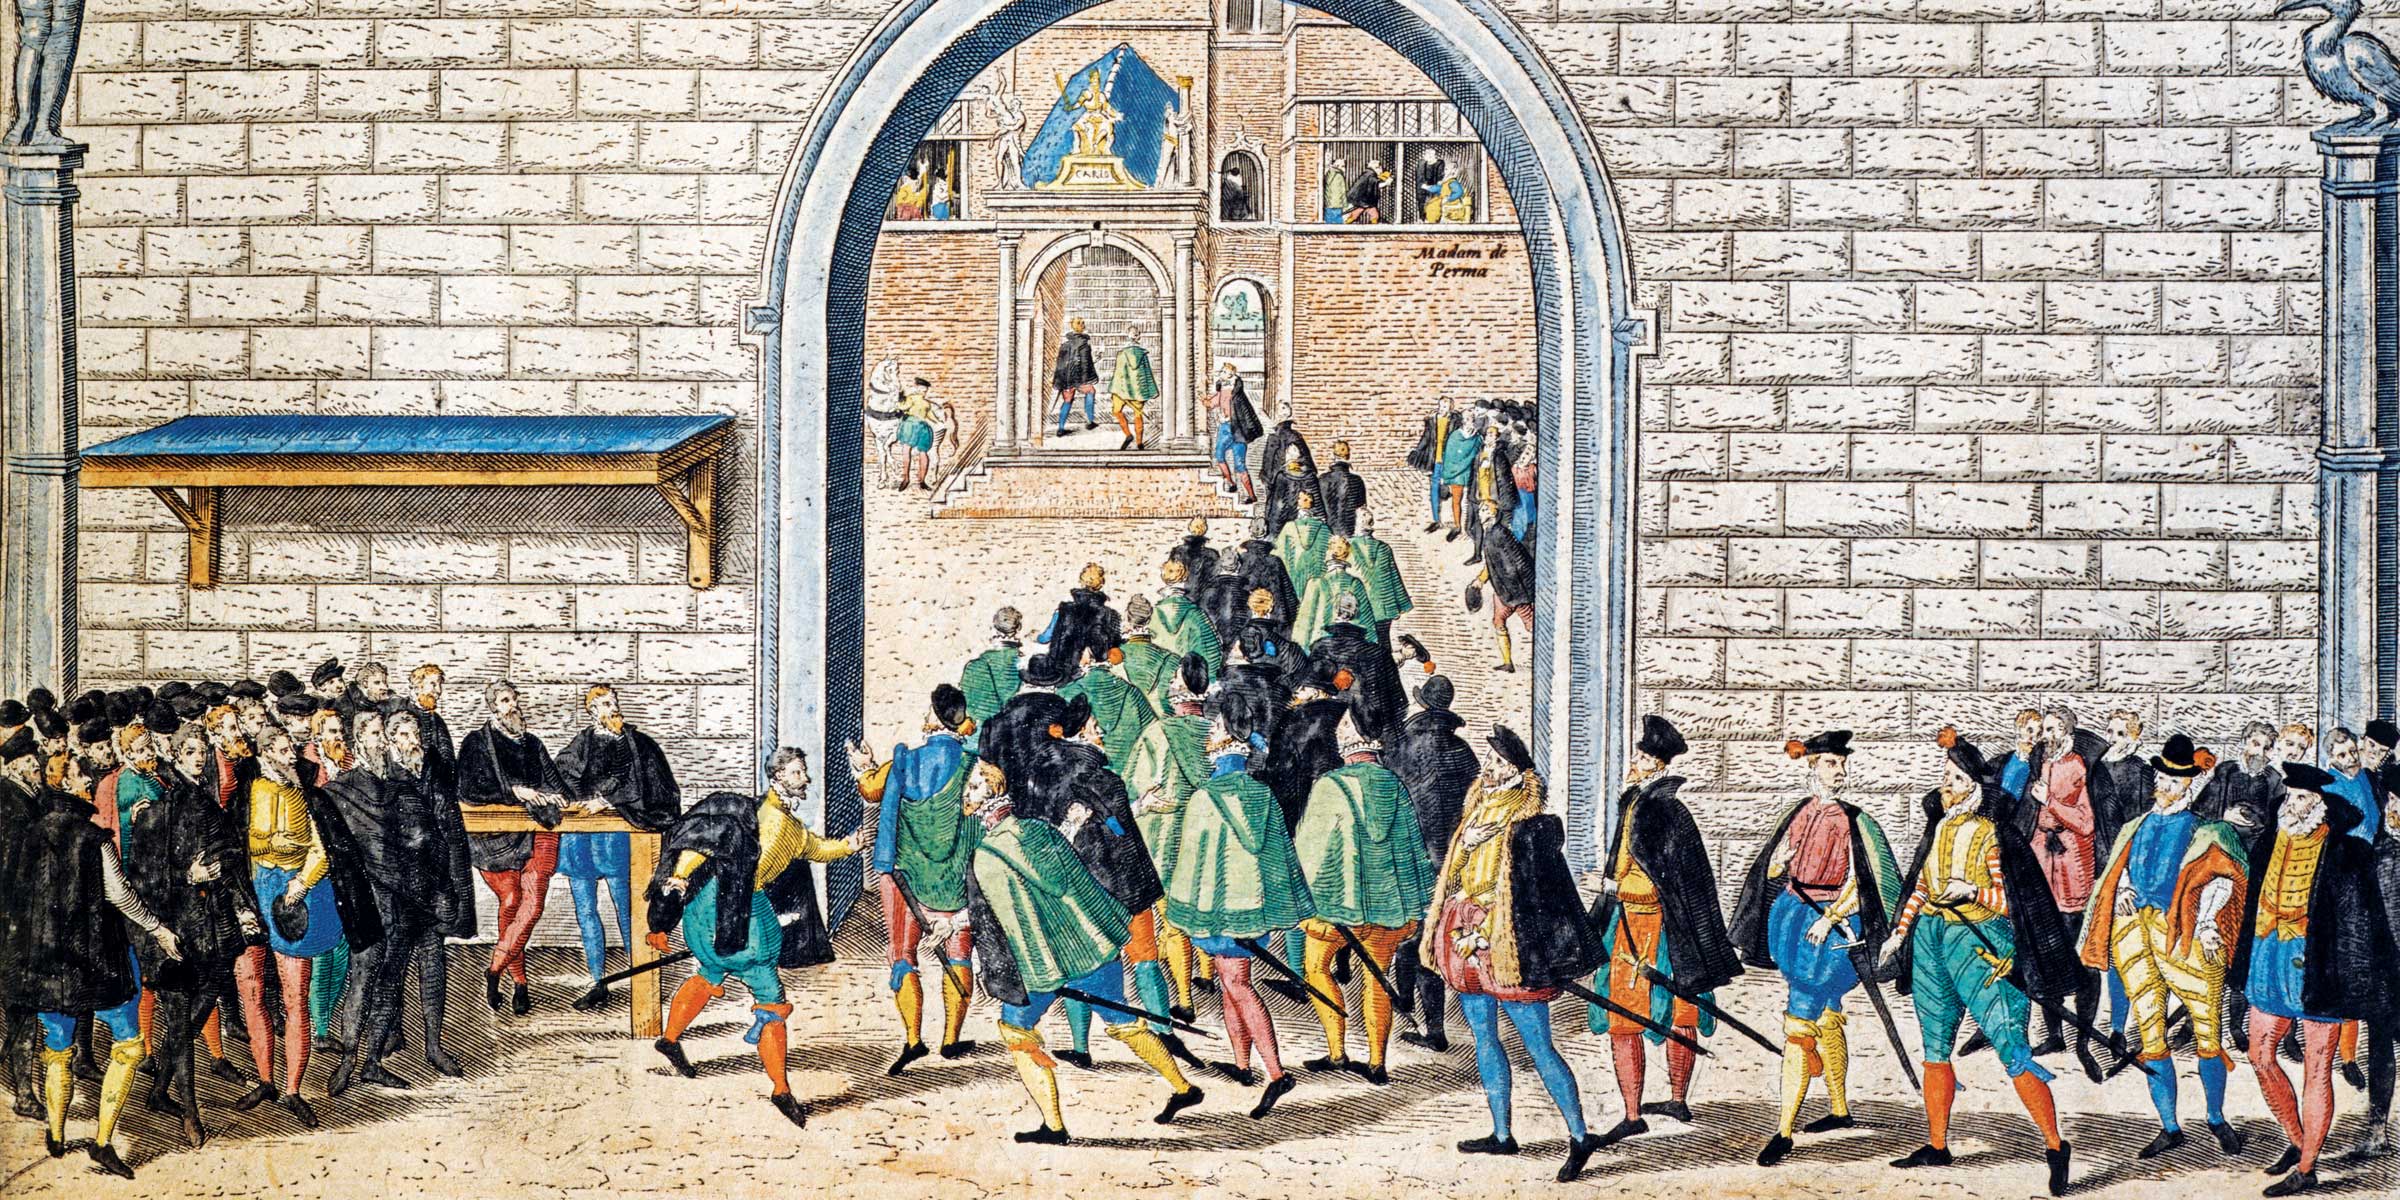 A crowd of colorfully dressed men in capes entering a stone archway.